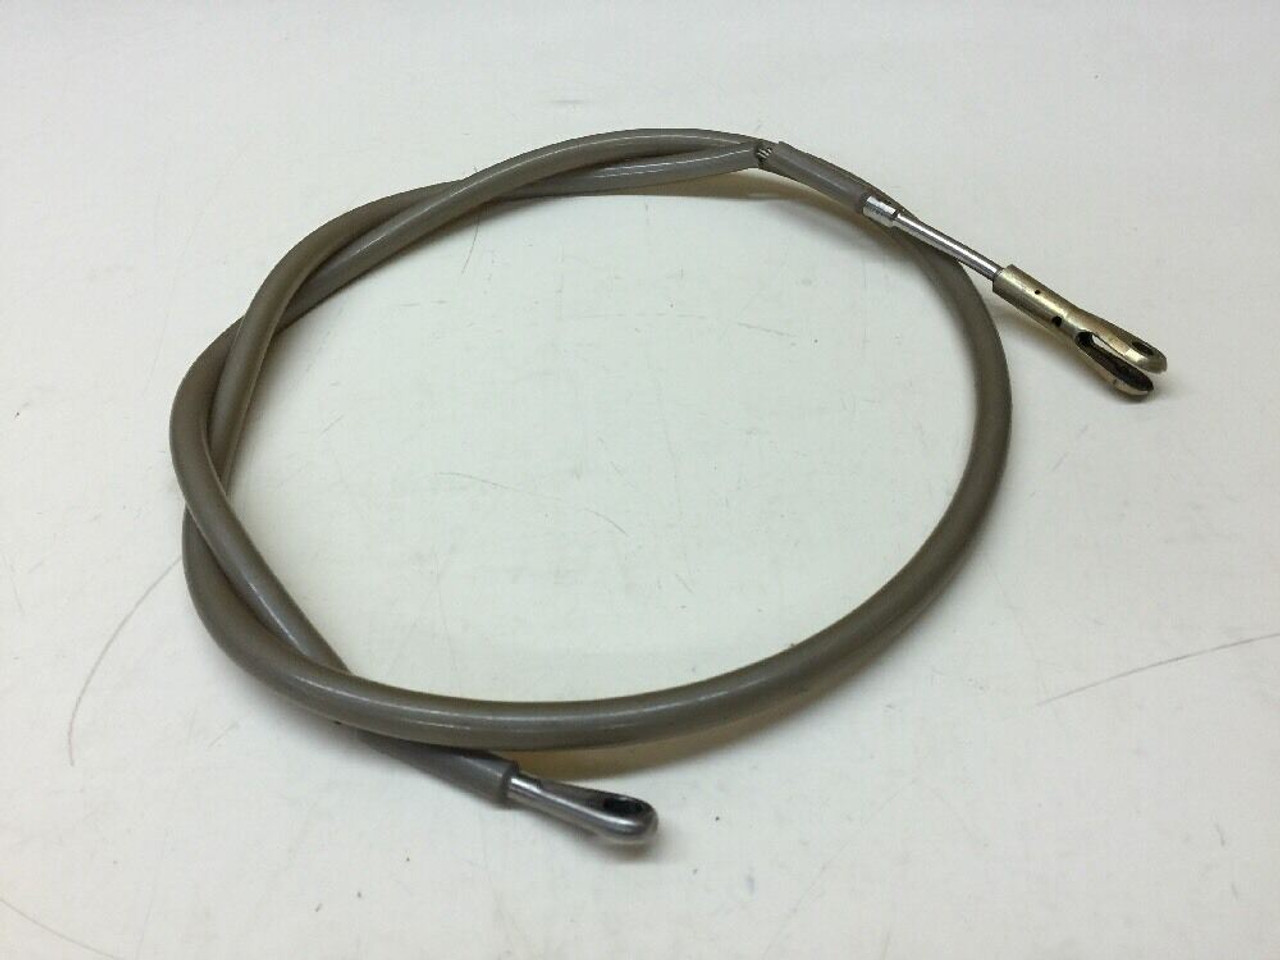 4 ft. Retractable Wire Cable Assembly MUV901503-21 Raytheon Aircraft Hawker 